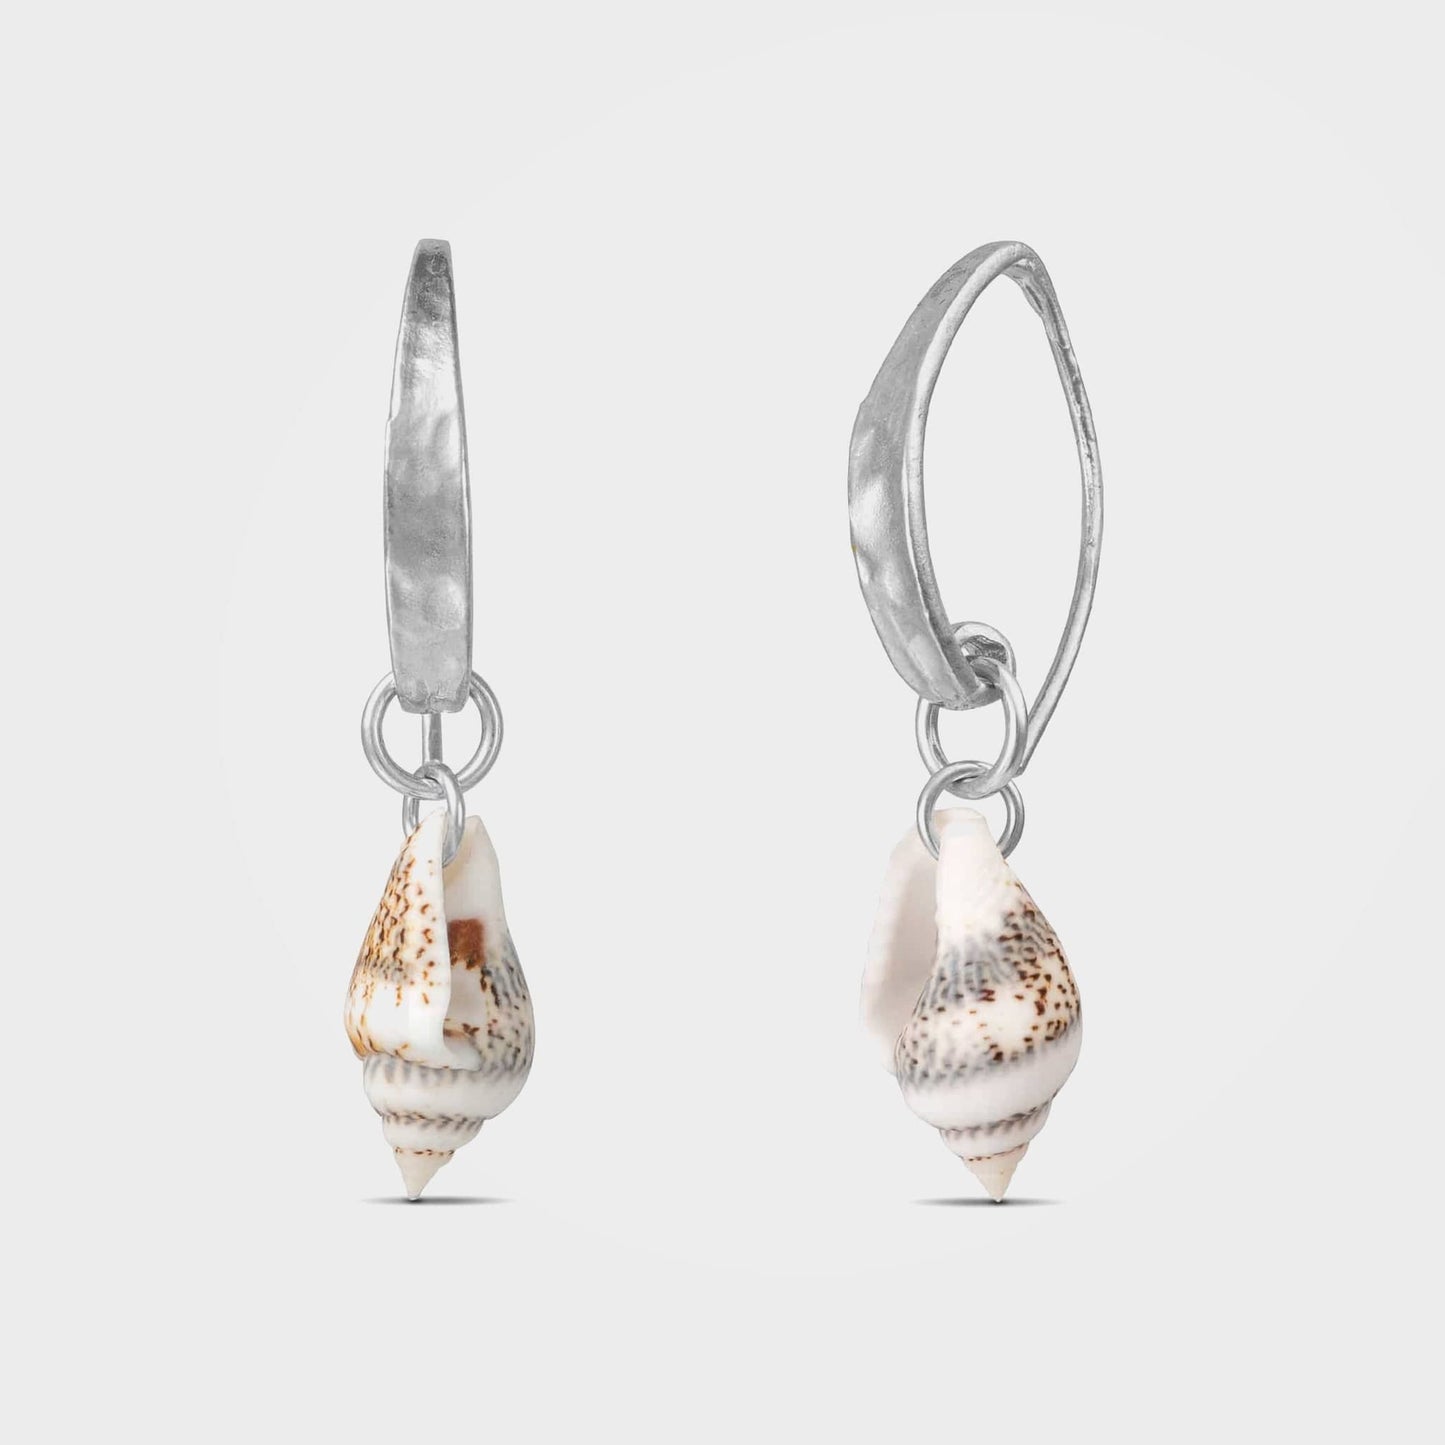 Gold or Silver Tiger Shell Earrings, Concha | By Lunar James